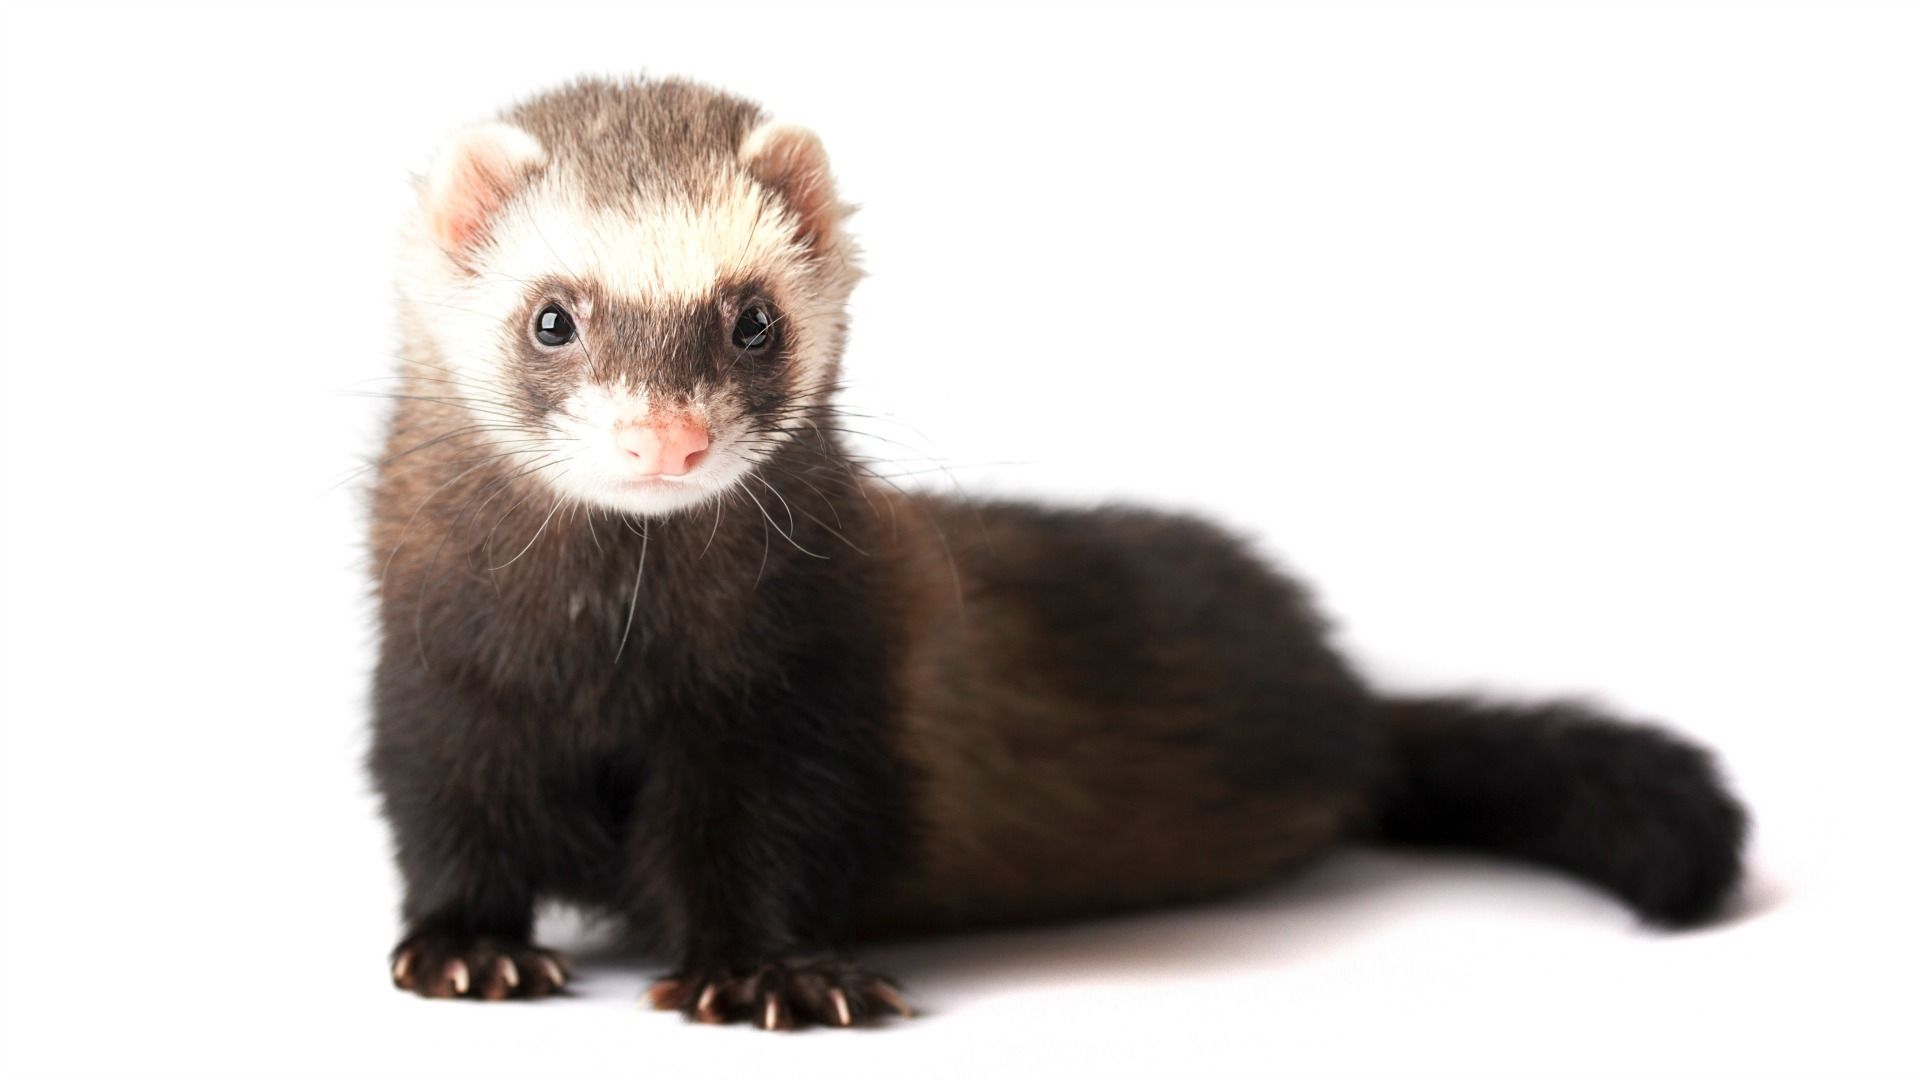 Ferret facts that will either freak you out or make you want to